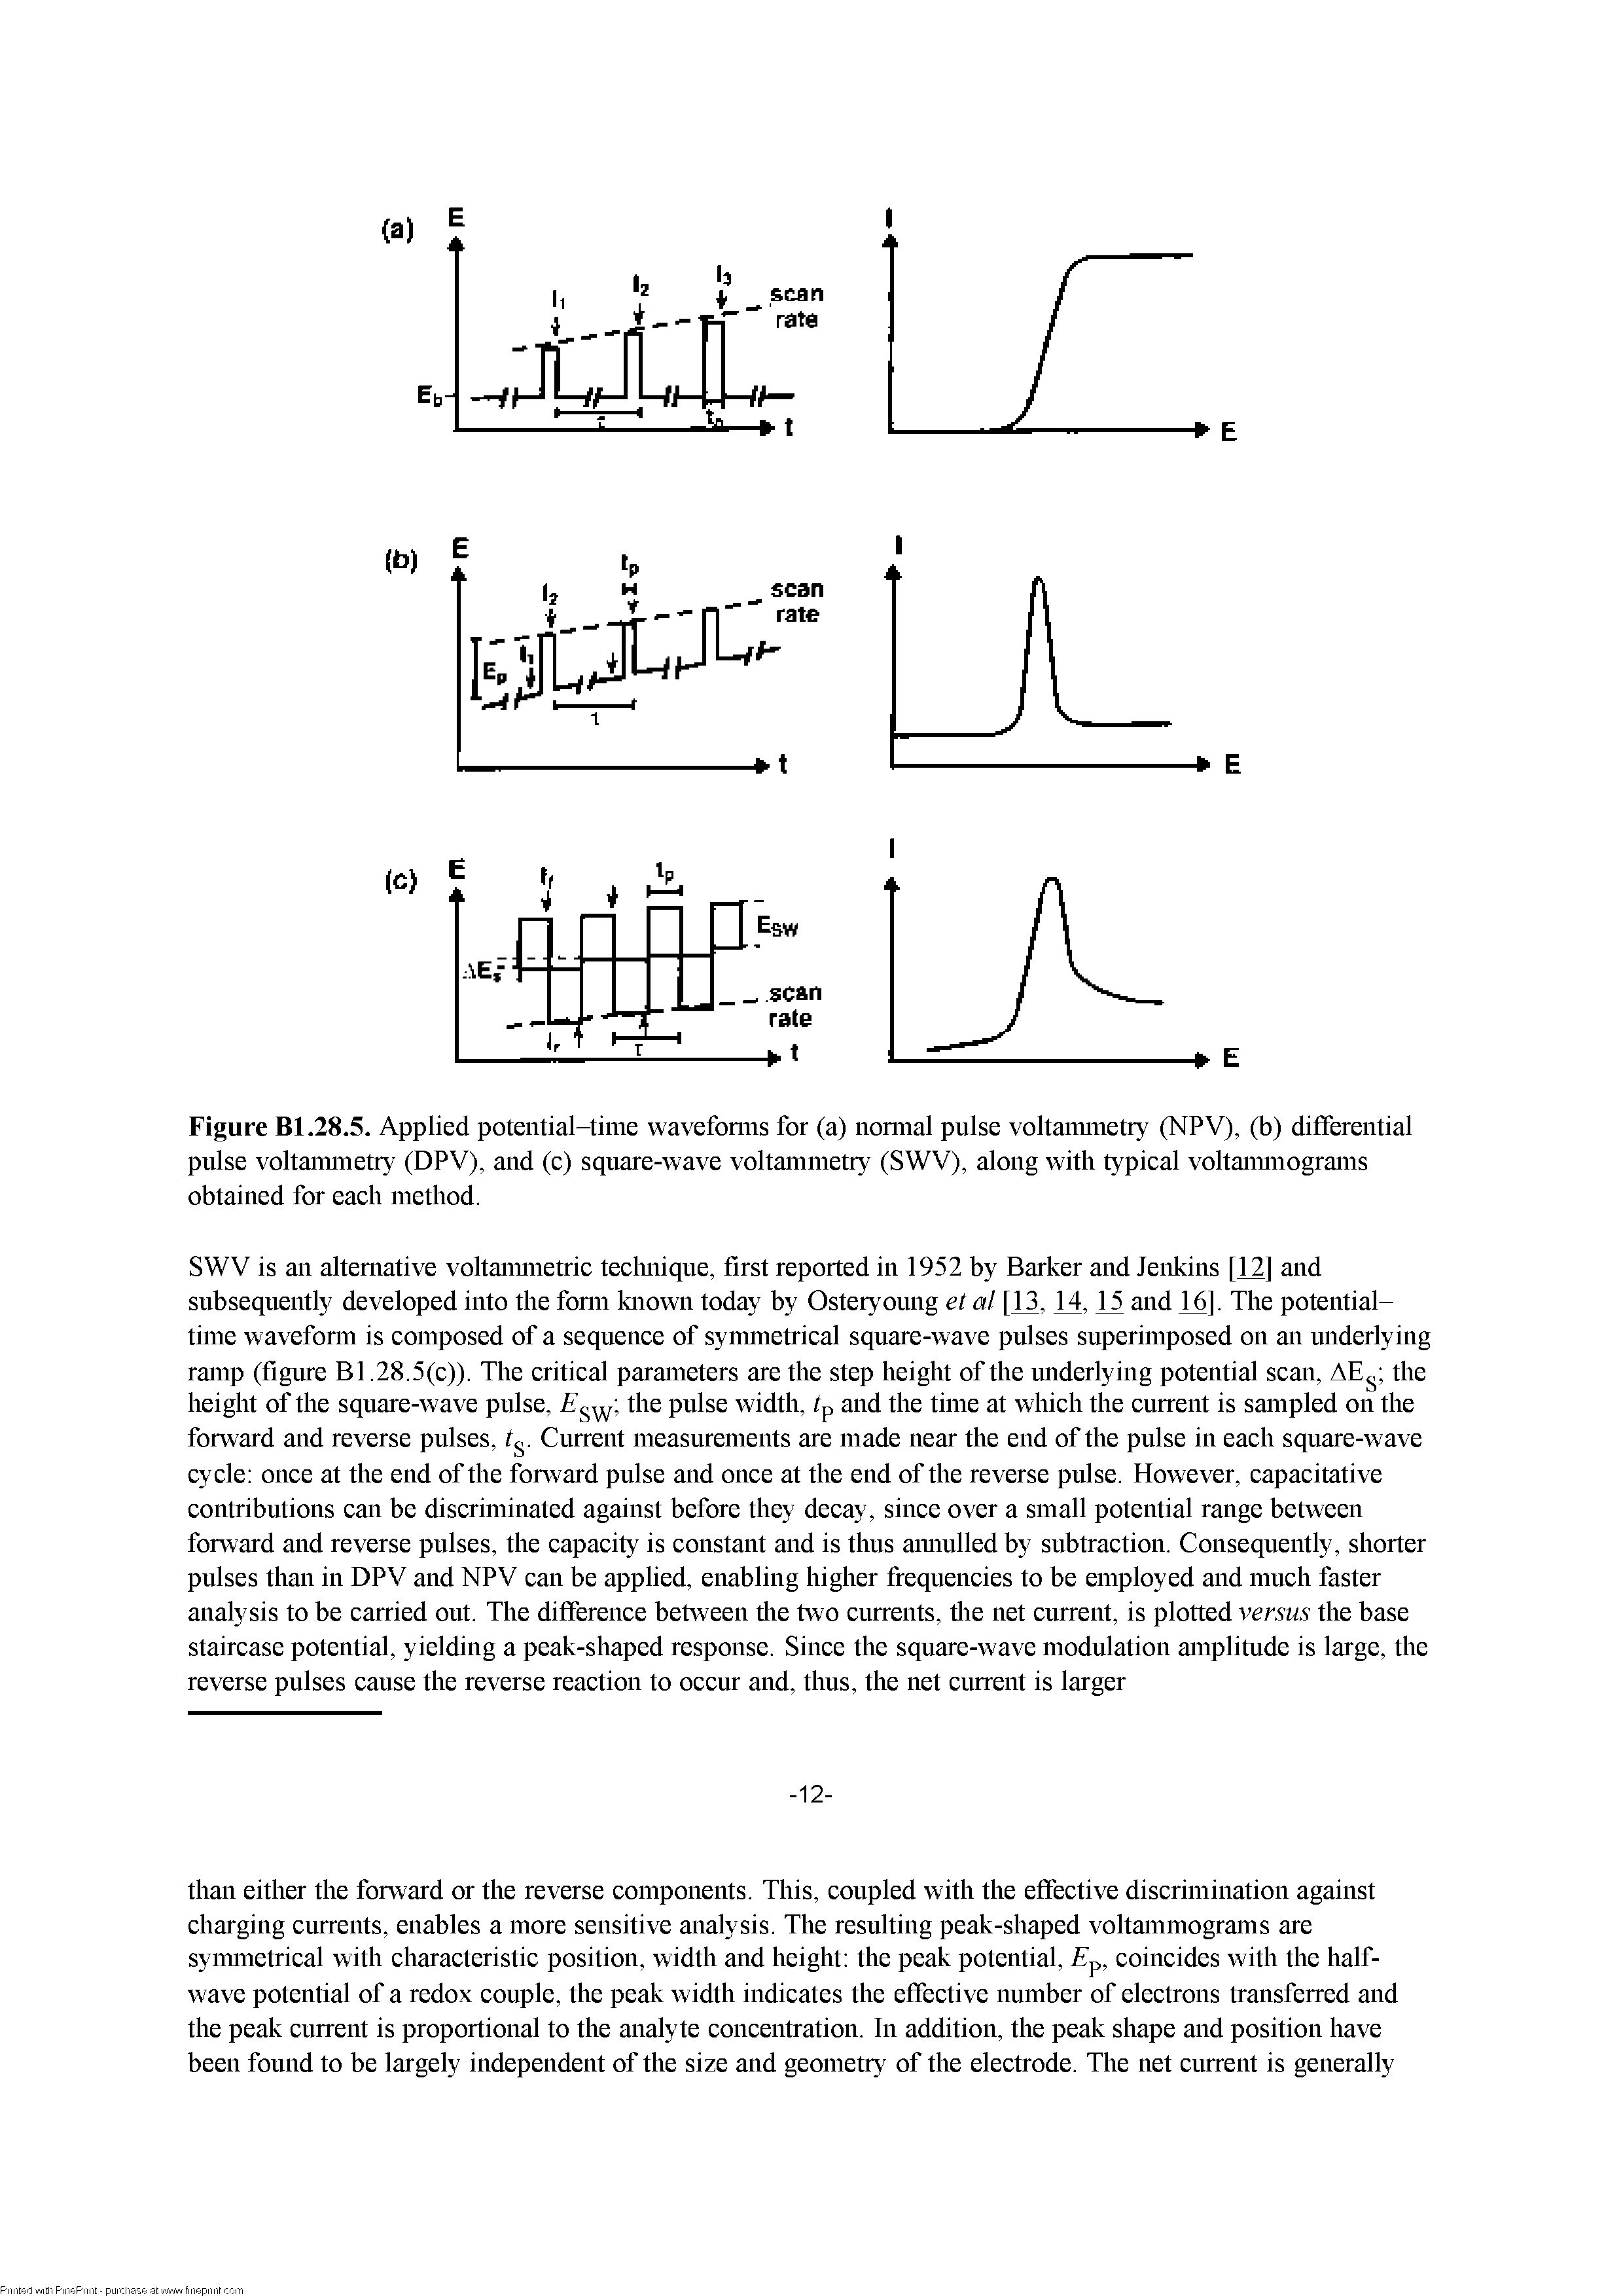 Figure Bl.28.5. Applied potential-time wavefonns for (a) nomial pulse voltannnetry (NPV), (b) differential pulse voltannnetry (DPV), and (e) square-wave voltammetry (SWV), along with typieal voltannnograms obtained for eaeh method.